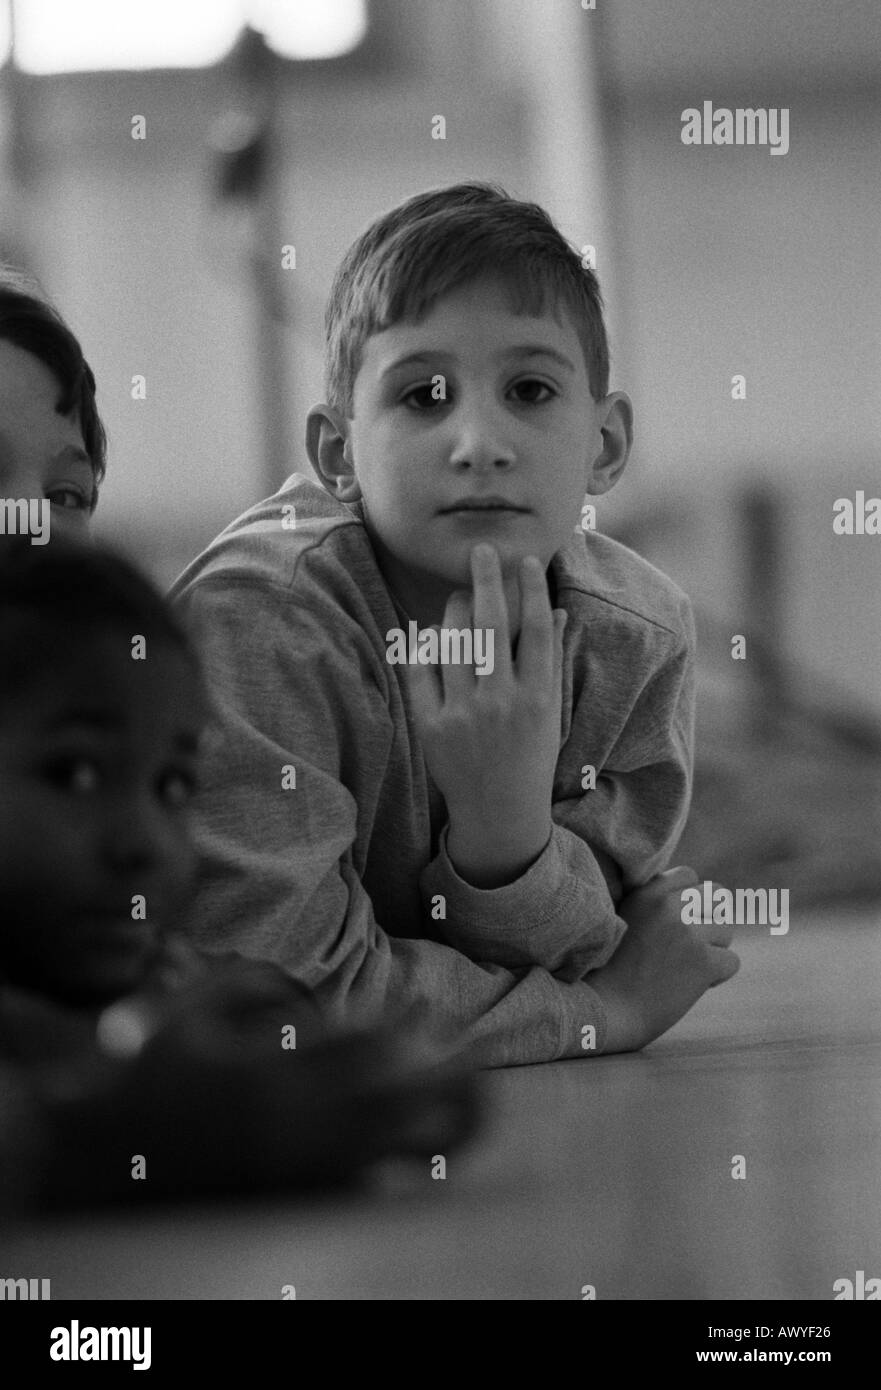 First grader looks at the camera during a teacher s lecture Stock Photo